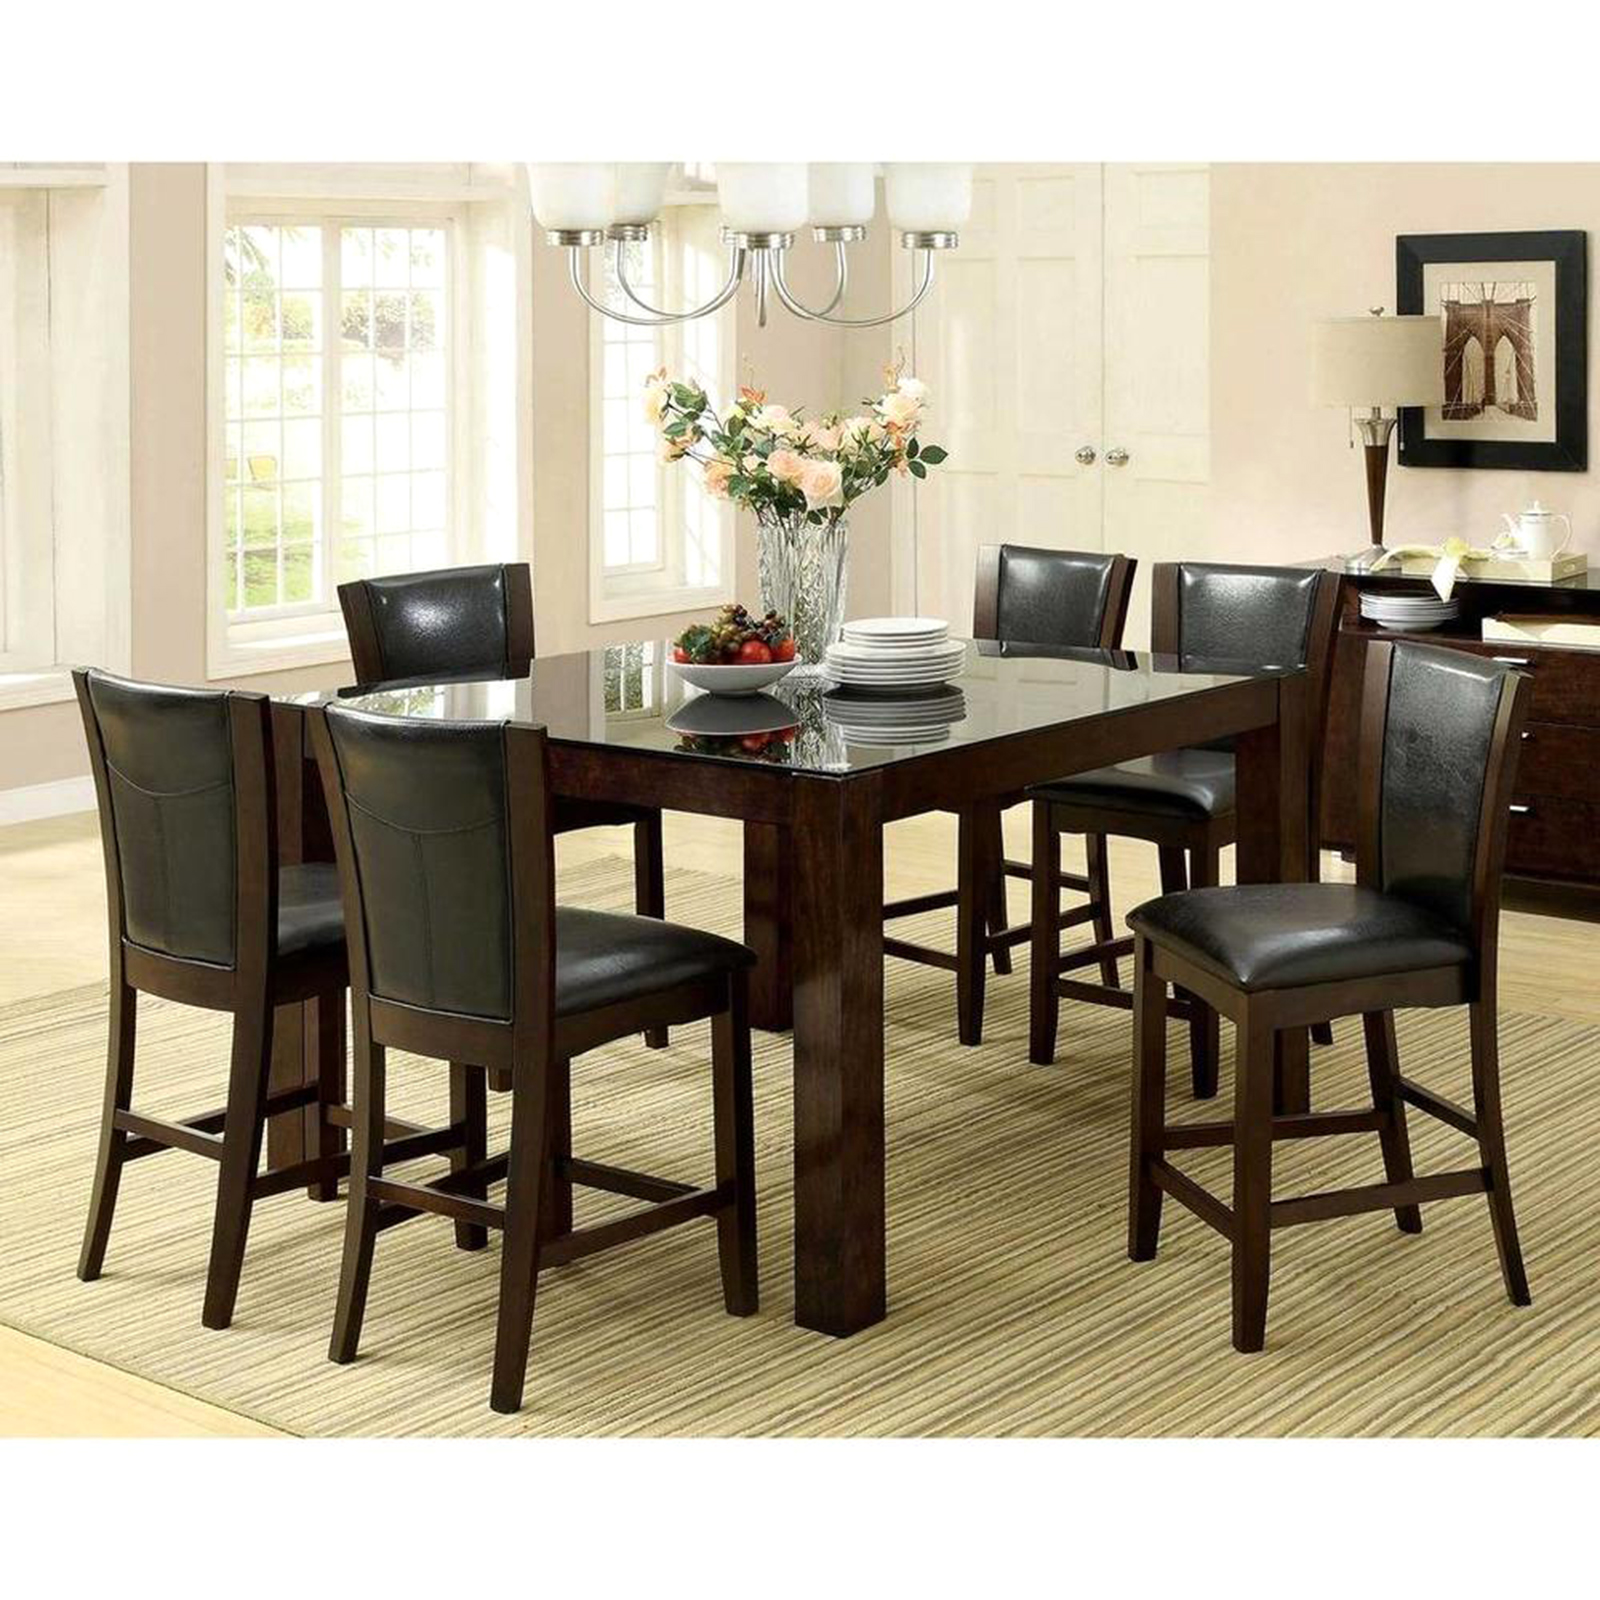 FOA Contemporary 7 Piece Counter Height Dining Table - Dark Cherry